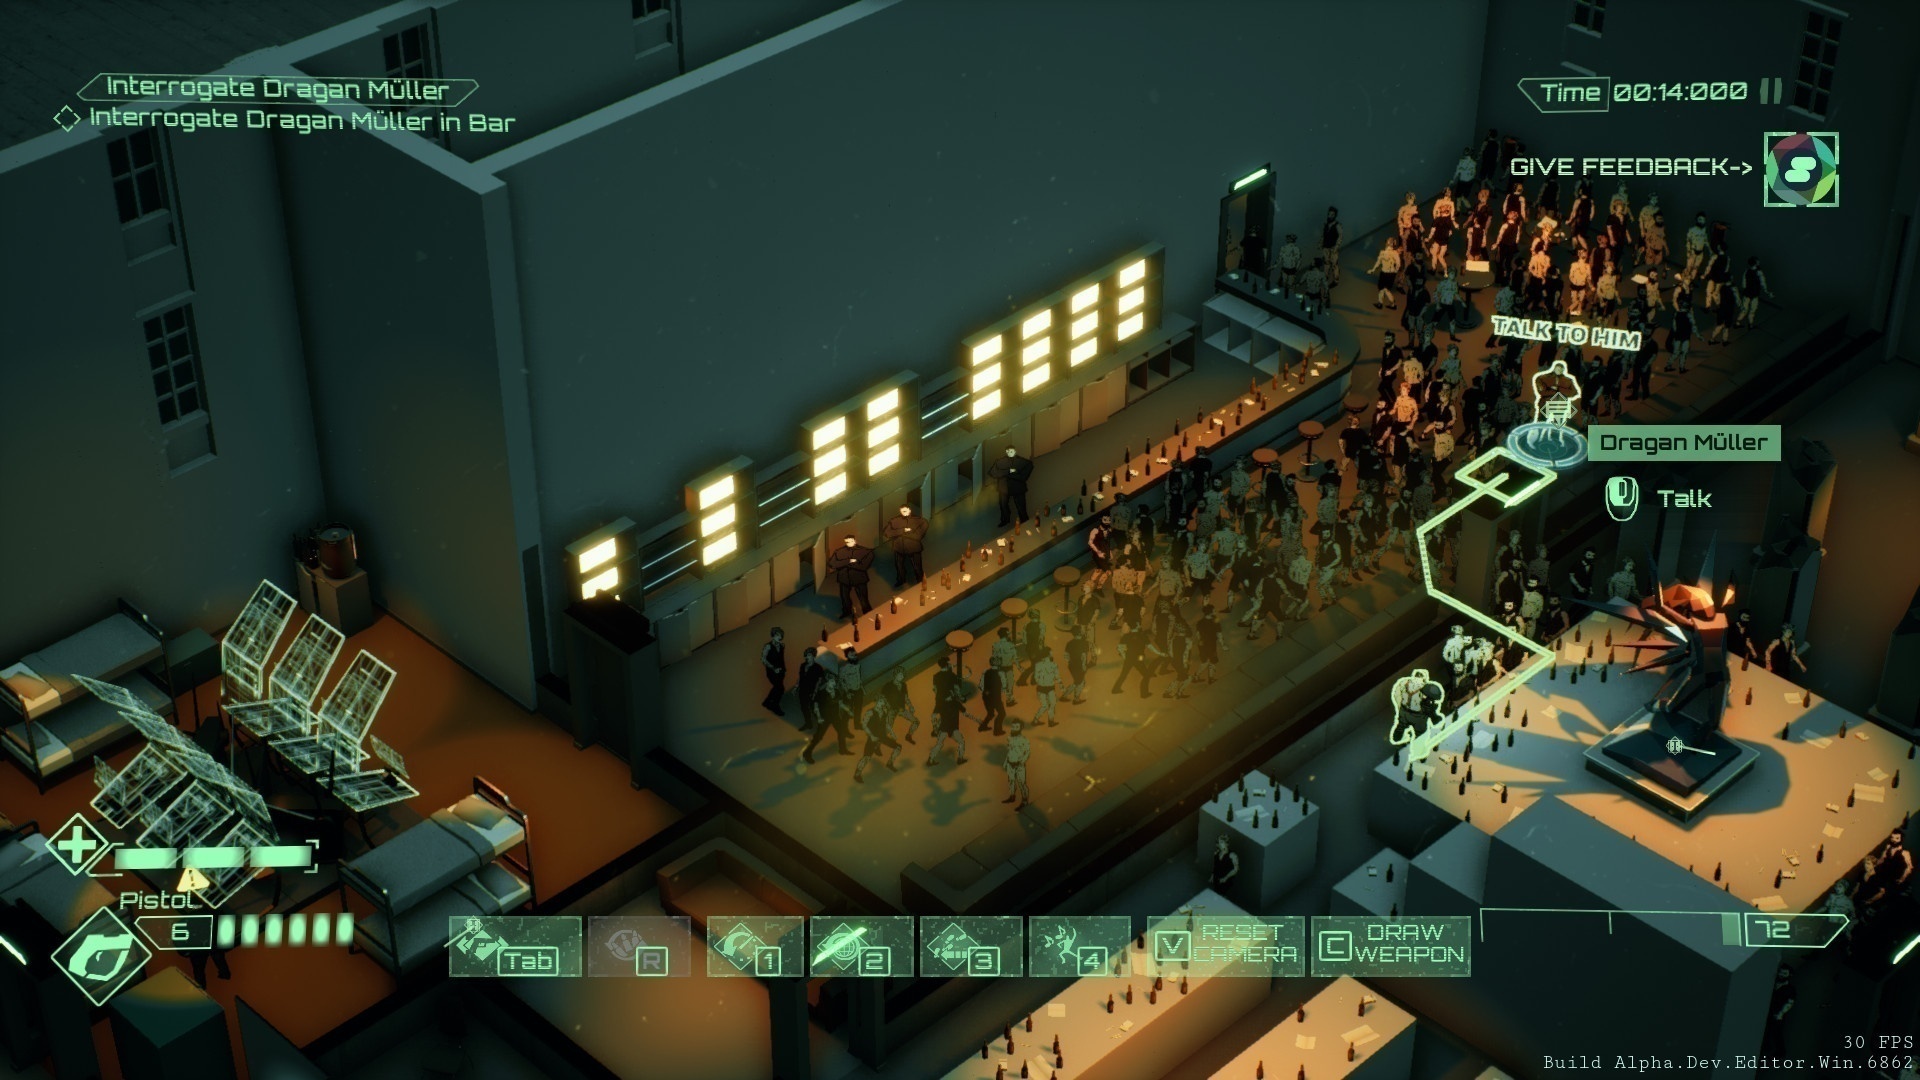 All Walls Must Fall marks Berlin Wall anniversary with new trailer, 50 percent discount